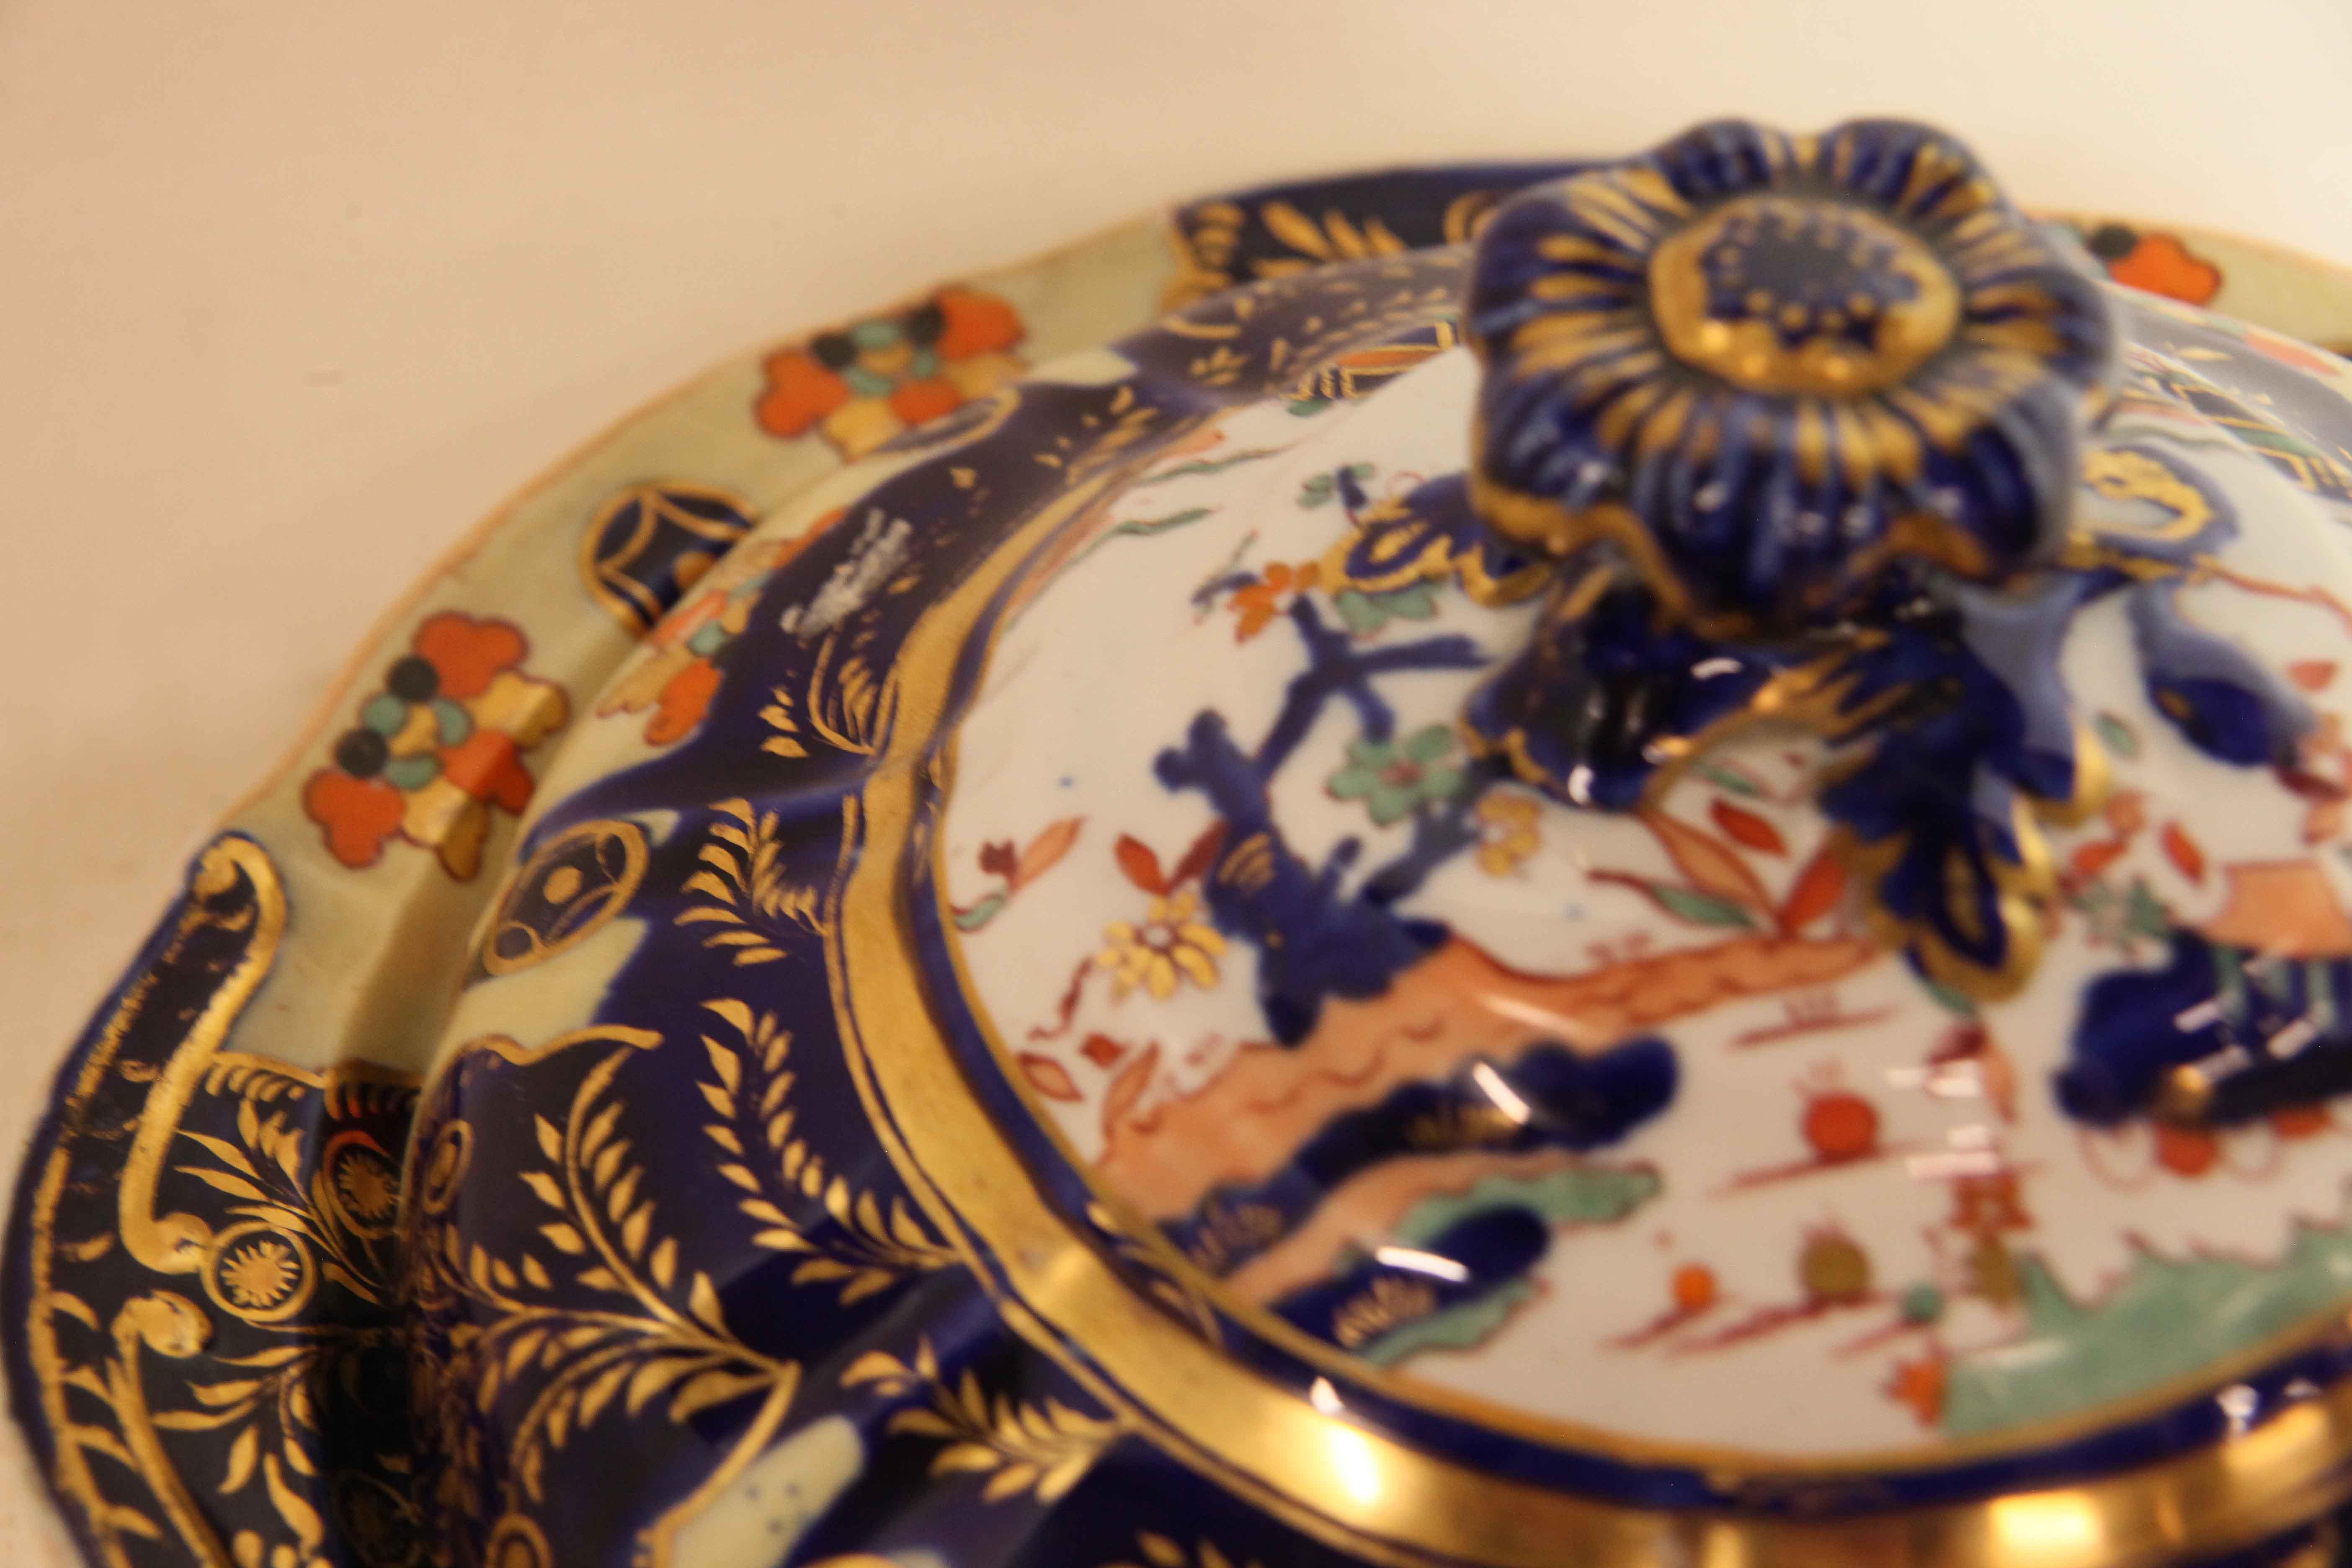 Mason's Ironstone tureen, the upper portion of the lid with finial and oriental motifs on a white background, lower portion with stylized flowers and foliage in various colors and gilding on a creamy yellow and cobalt background; Mason's mark on the